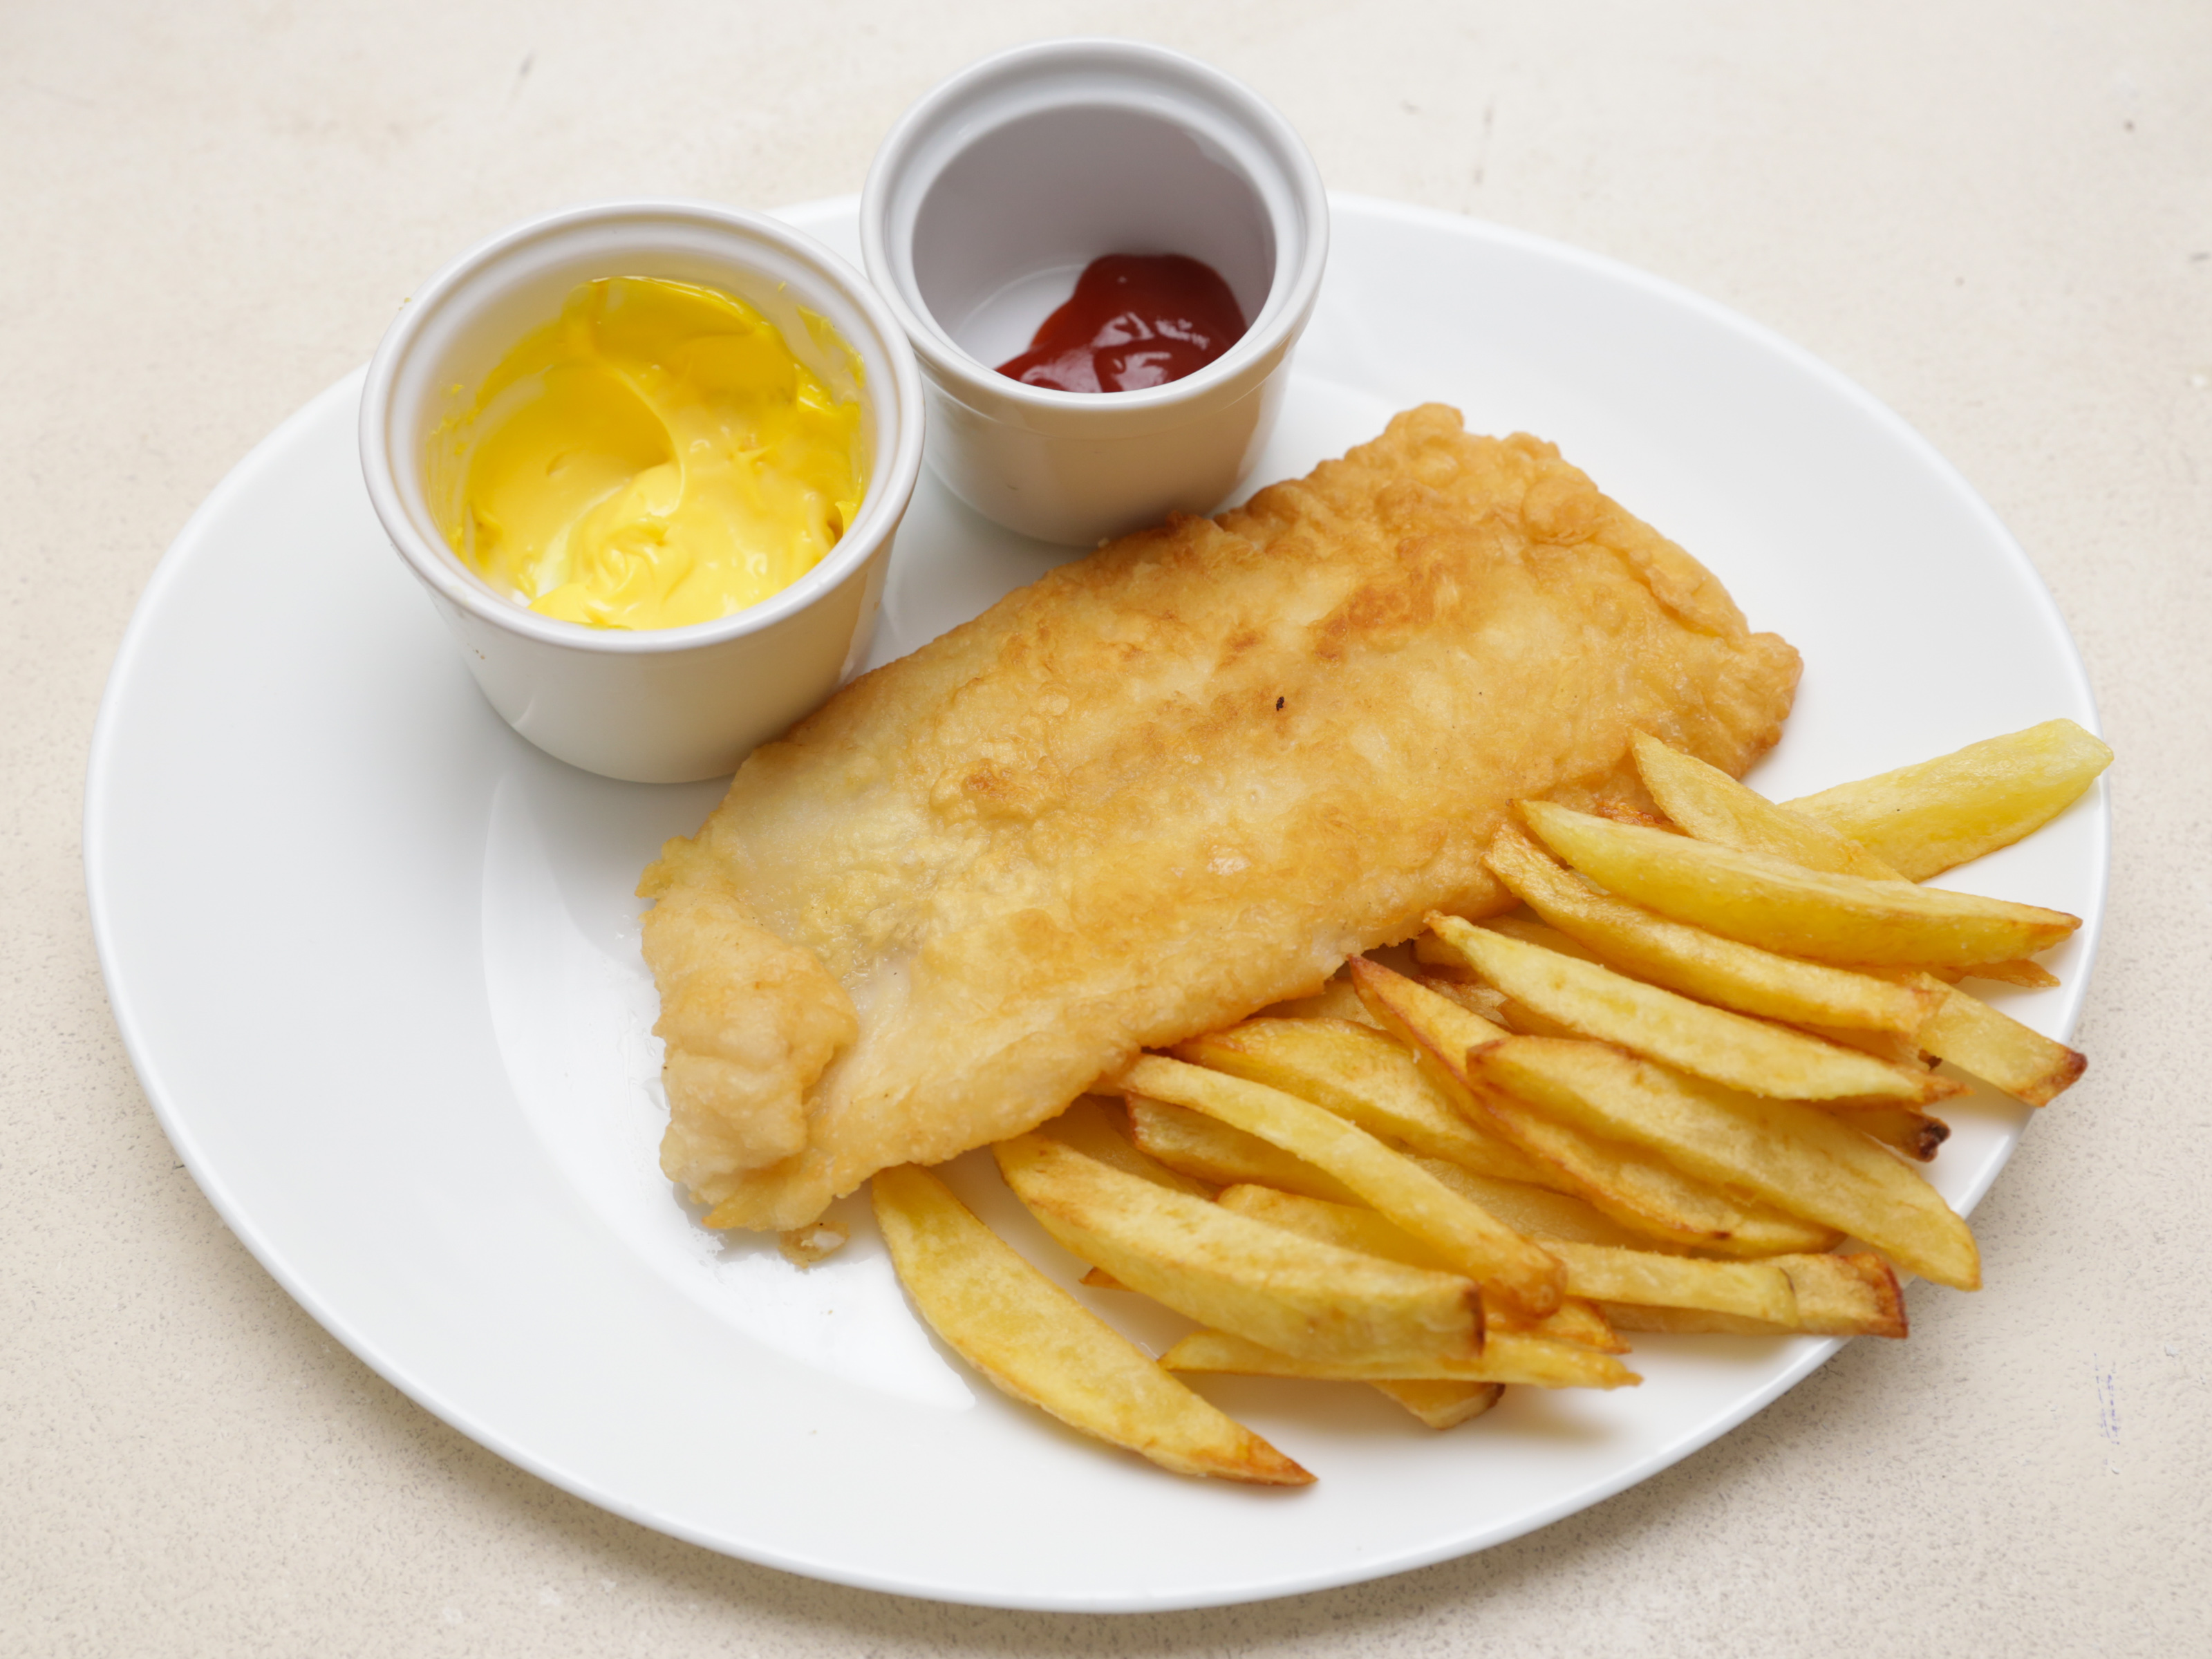 How to Make Fish and Chips: 14 Steps (with Pictures) - wikiHow